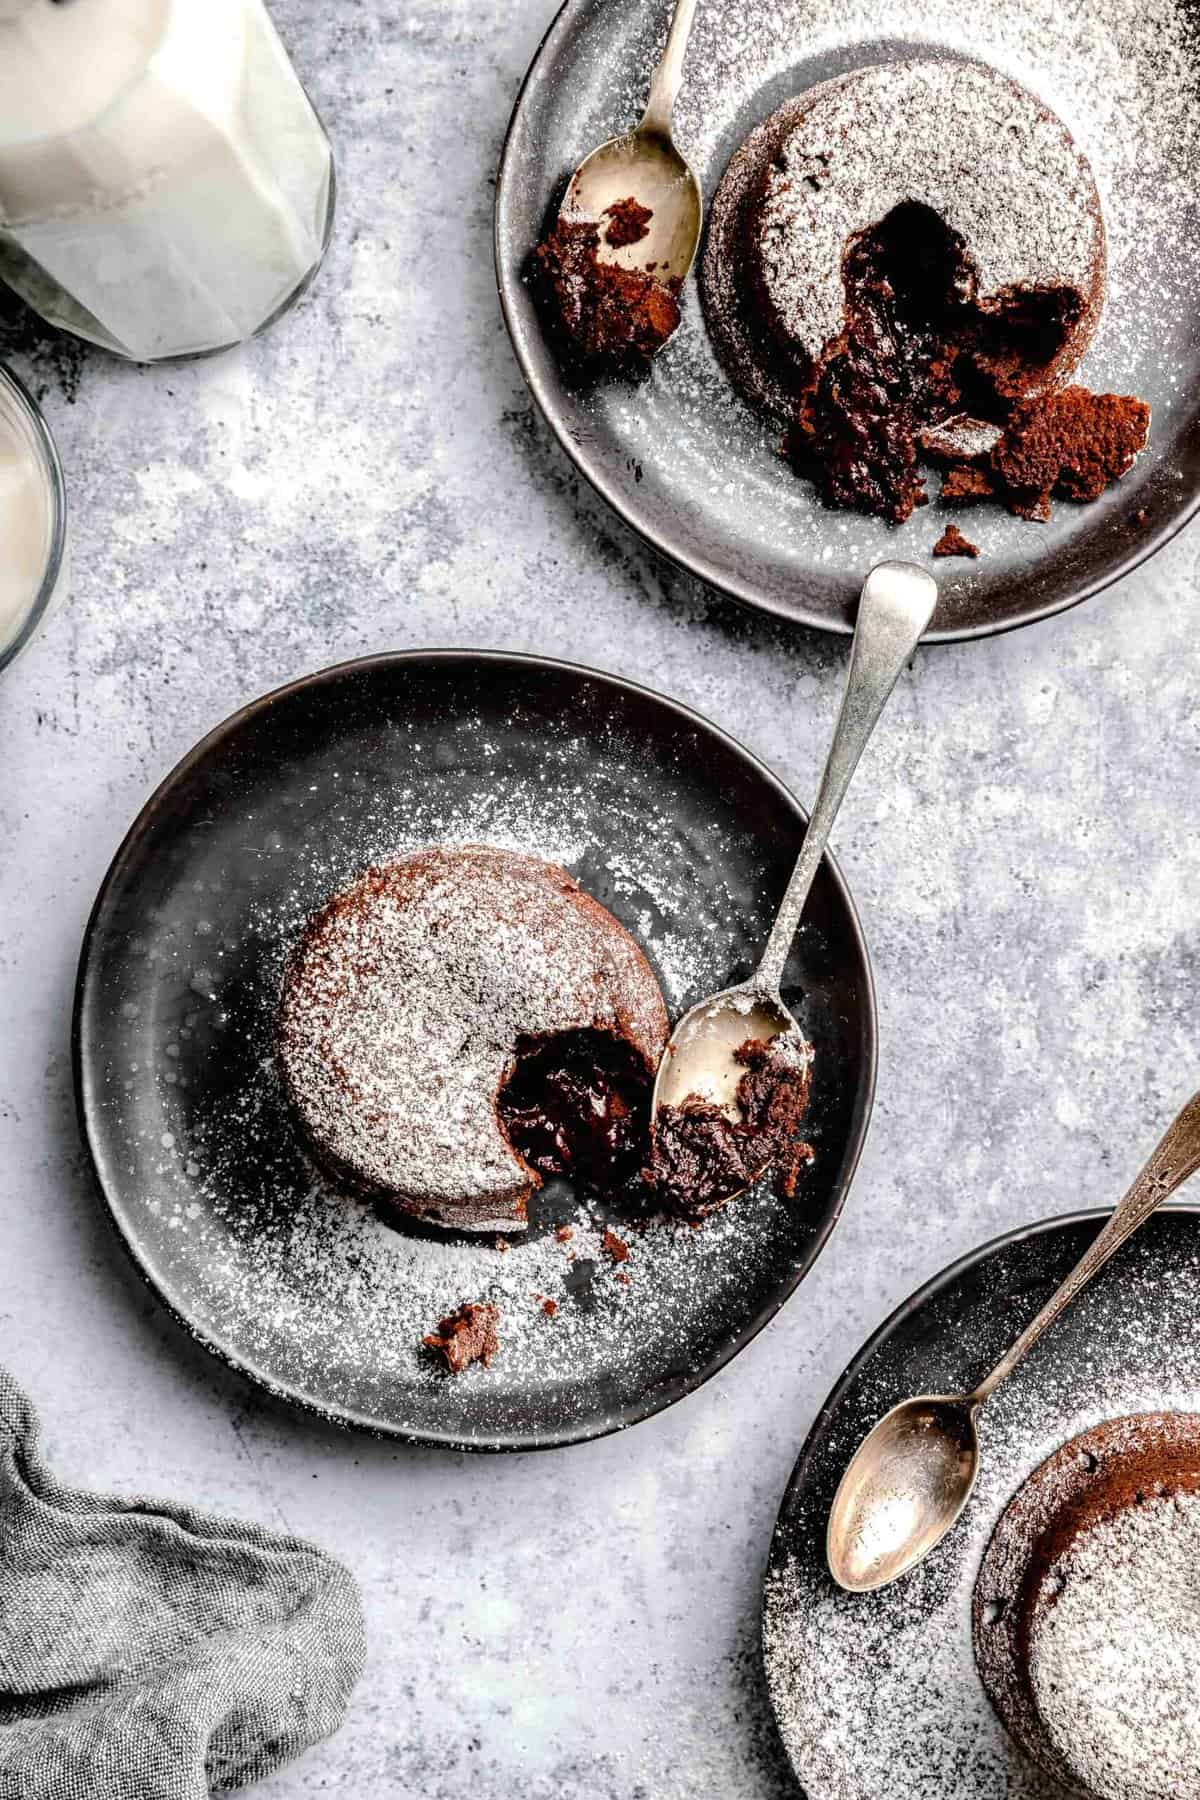 Molten lava cake served on plates with spoons near a glass of milk.